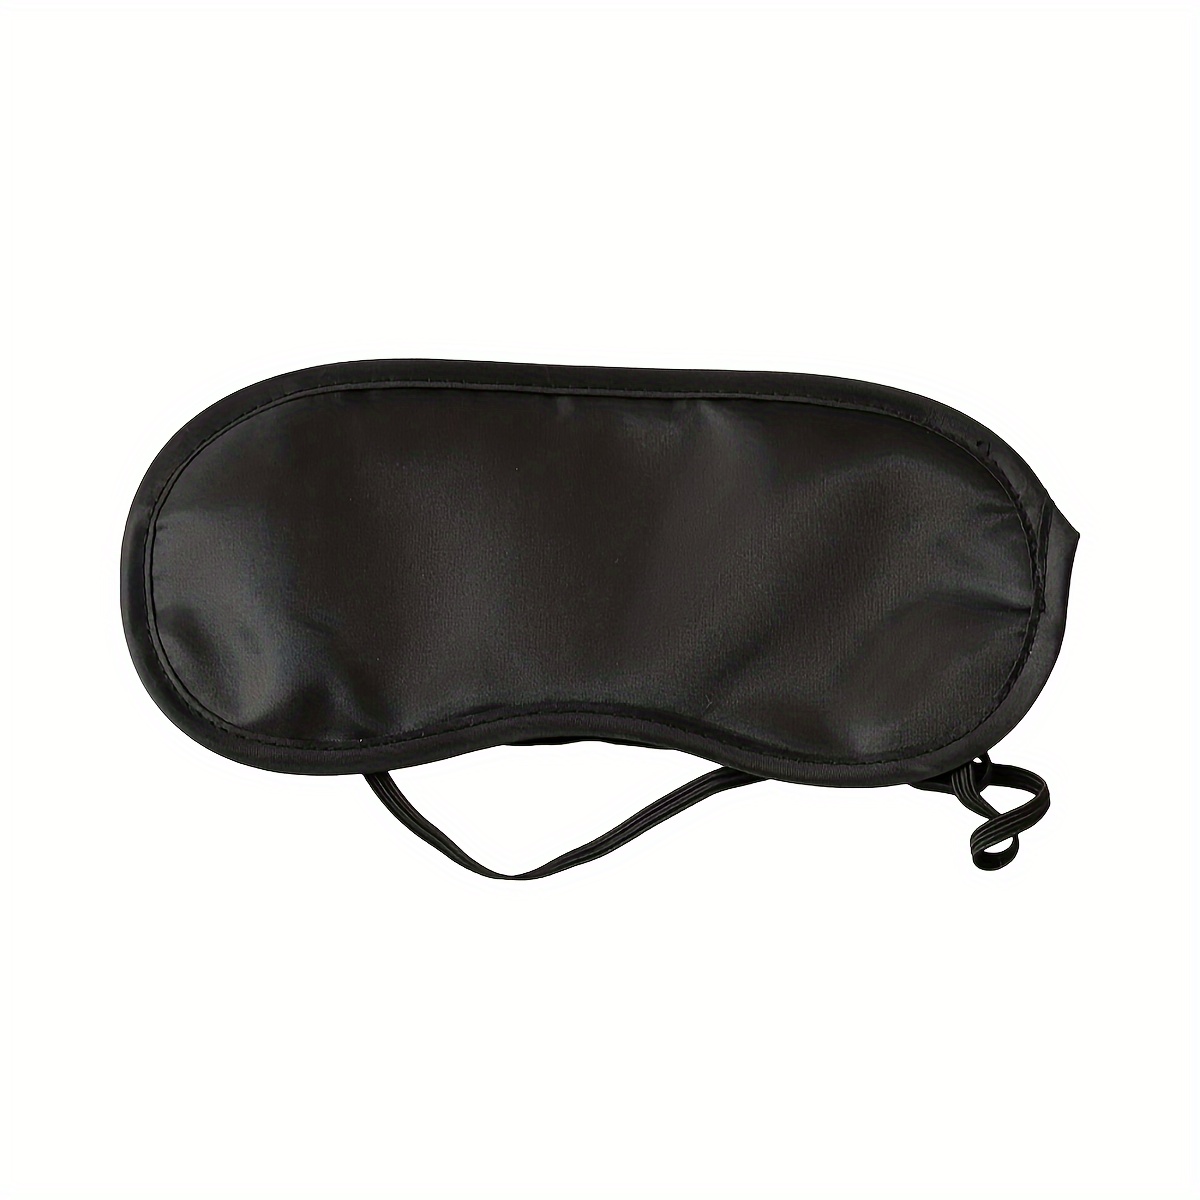 

10pack Blindfold Eye Mask Shade Cover For Sleeping With Nose Pad, Sleep Eye Mask For Travel